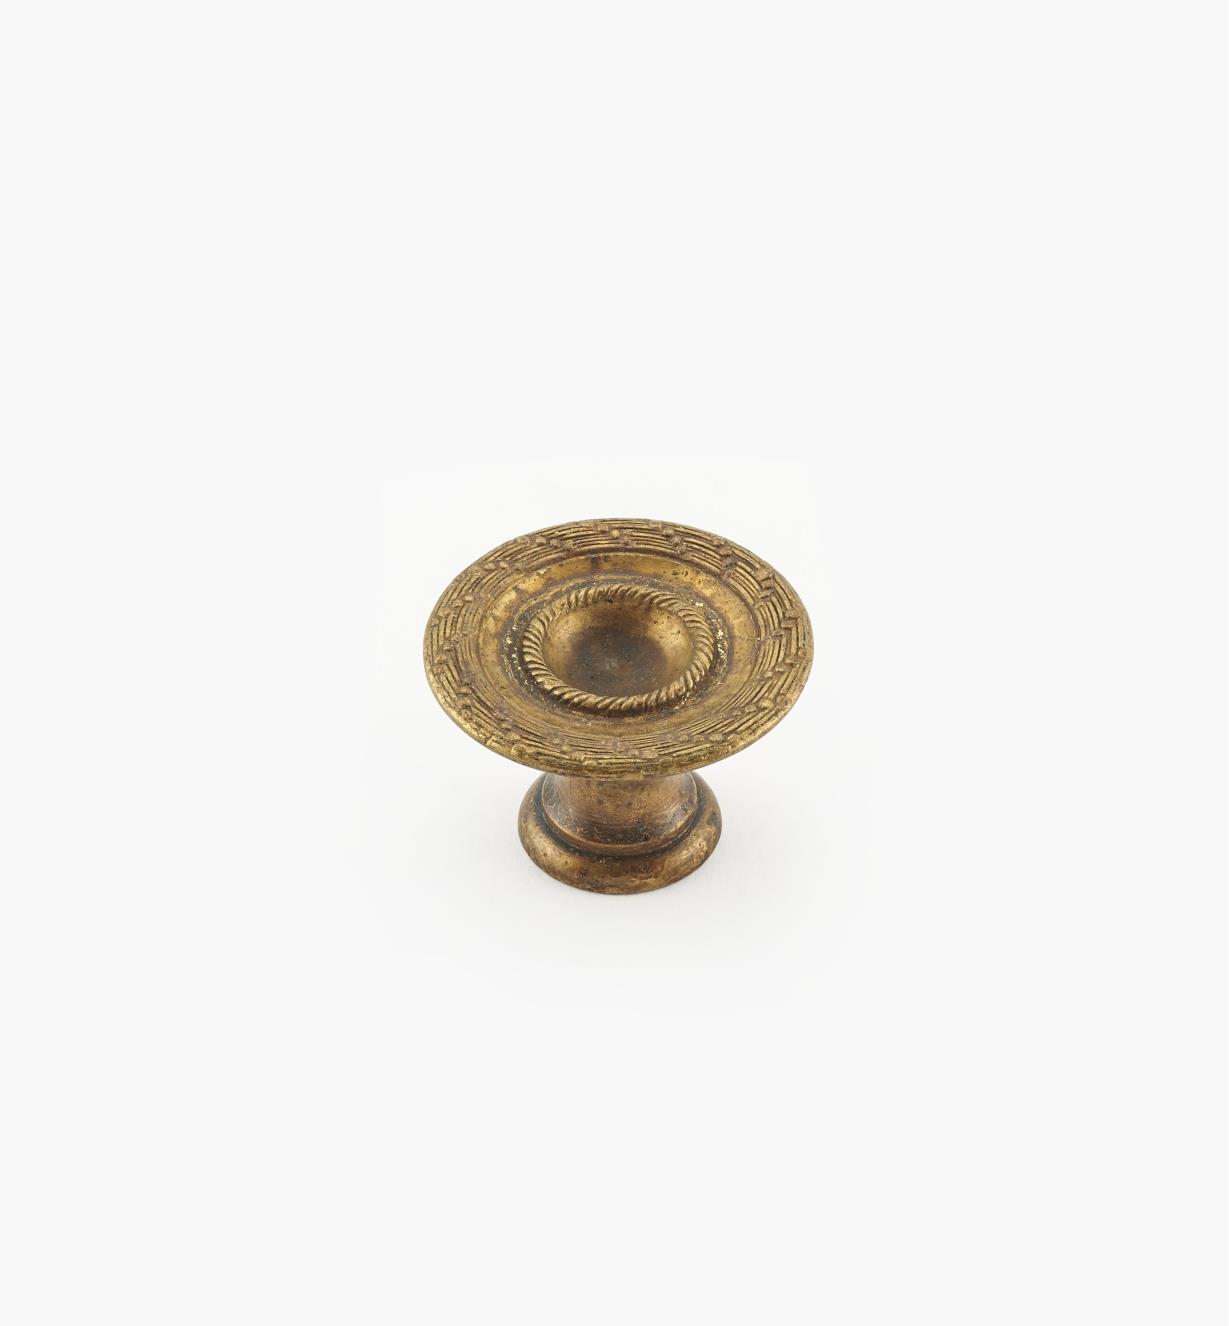 01A9030 - 30mm x 19mm Rope/Reed Old Brass Knob